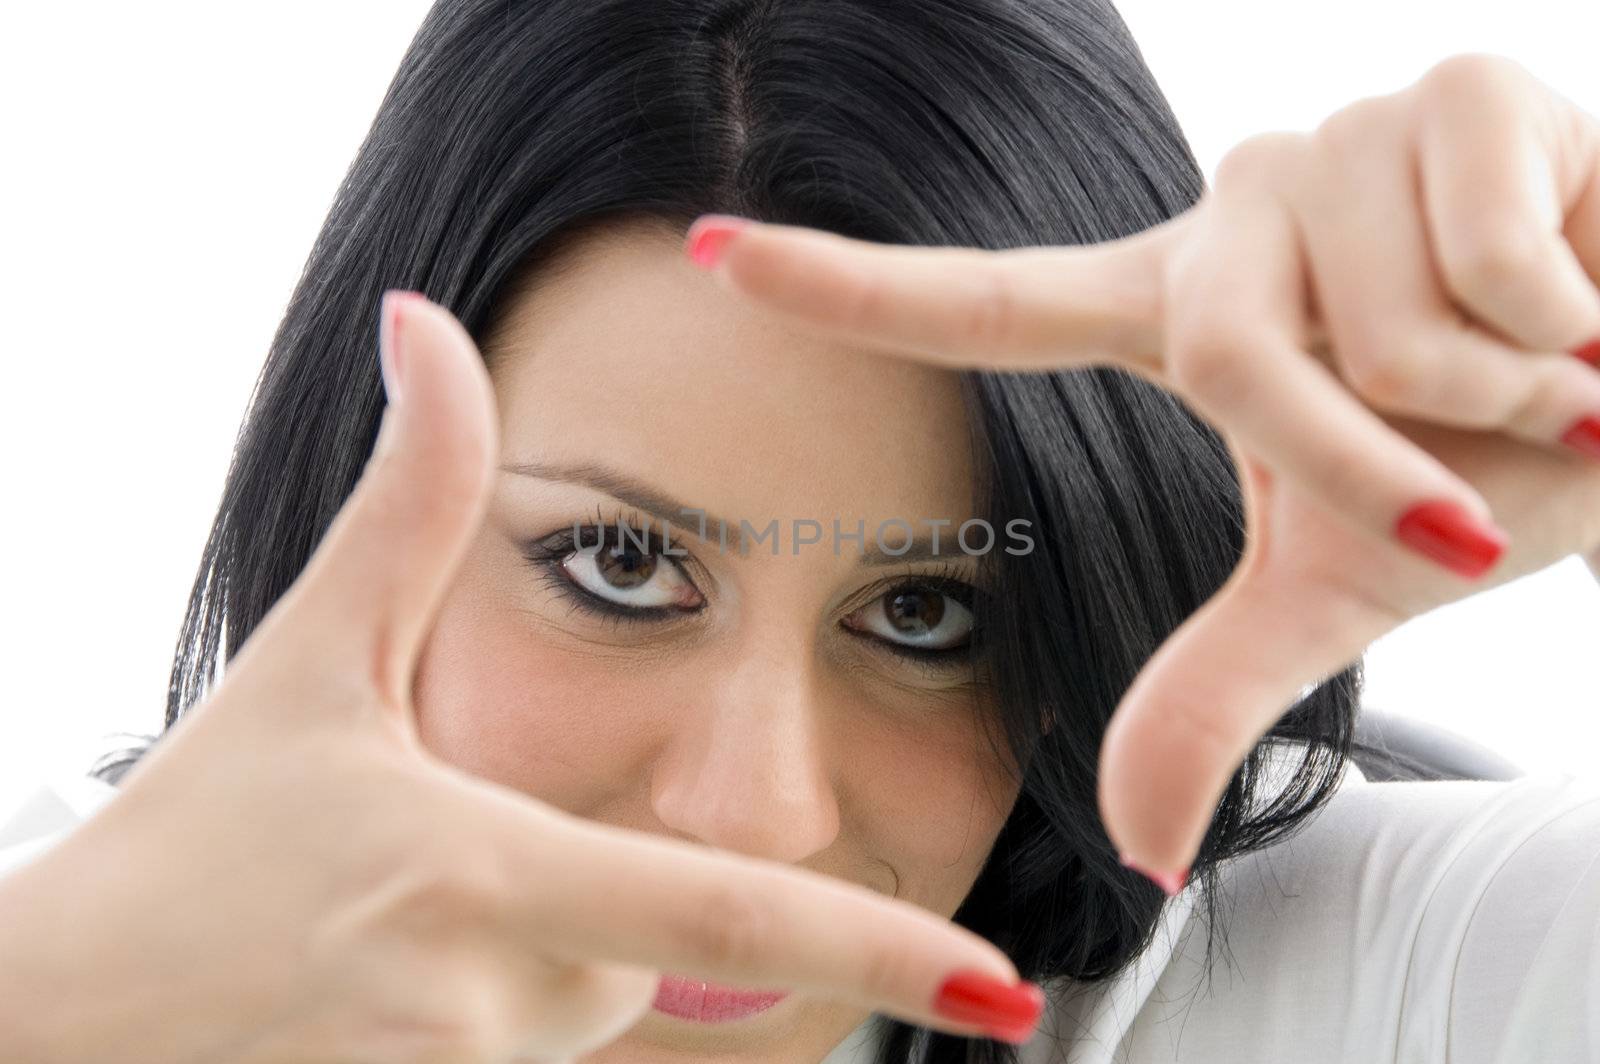 female showing framing hand gesture by imagerymajestic